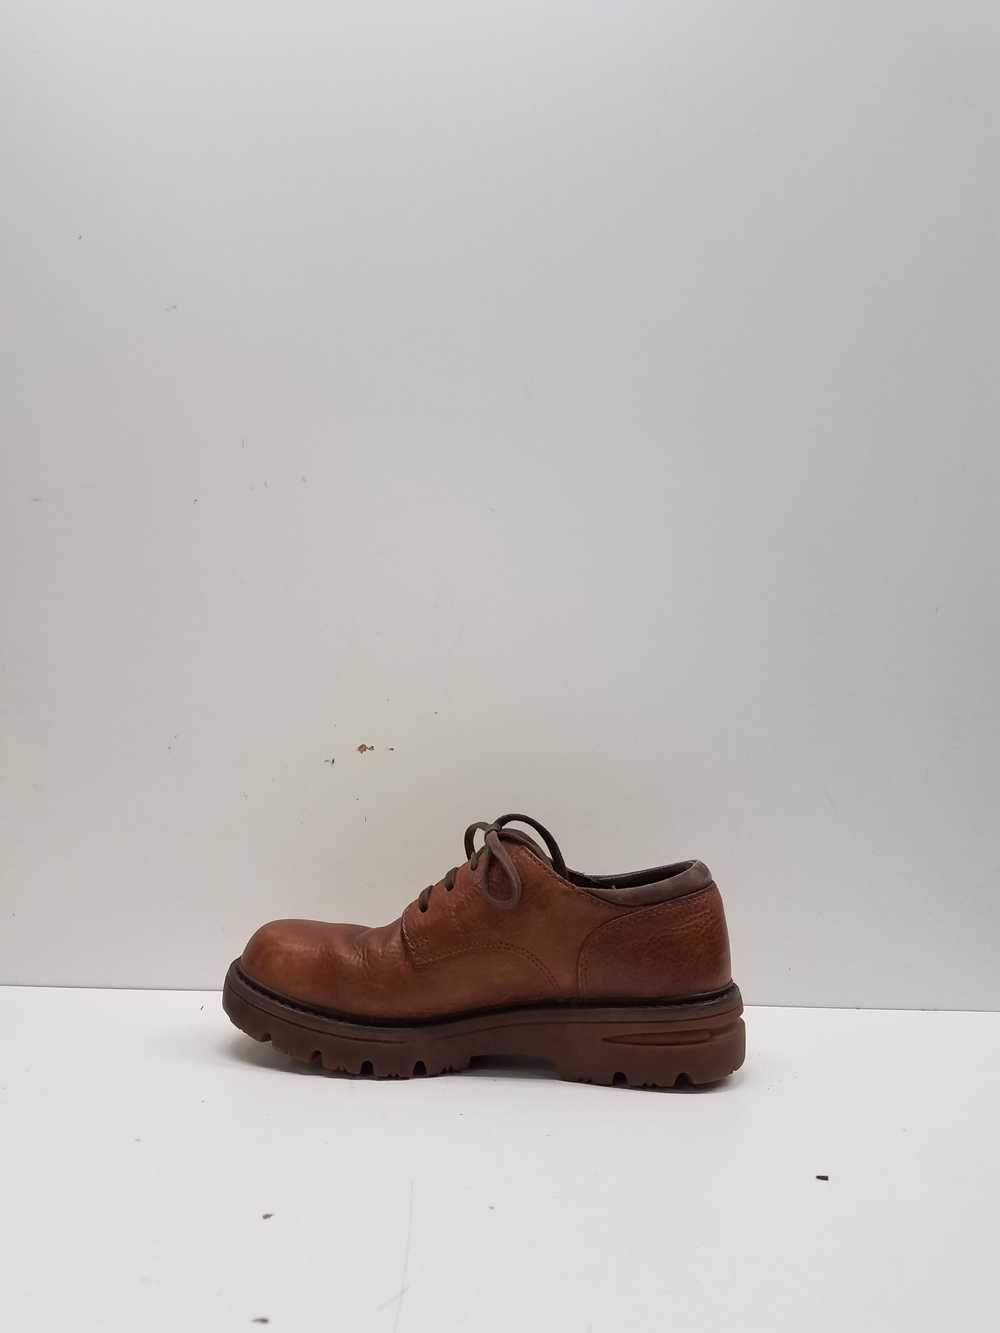 Timberland Brown Lace Up Men's Size 7.5M - image 2